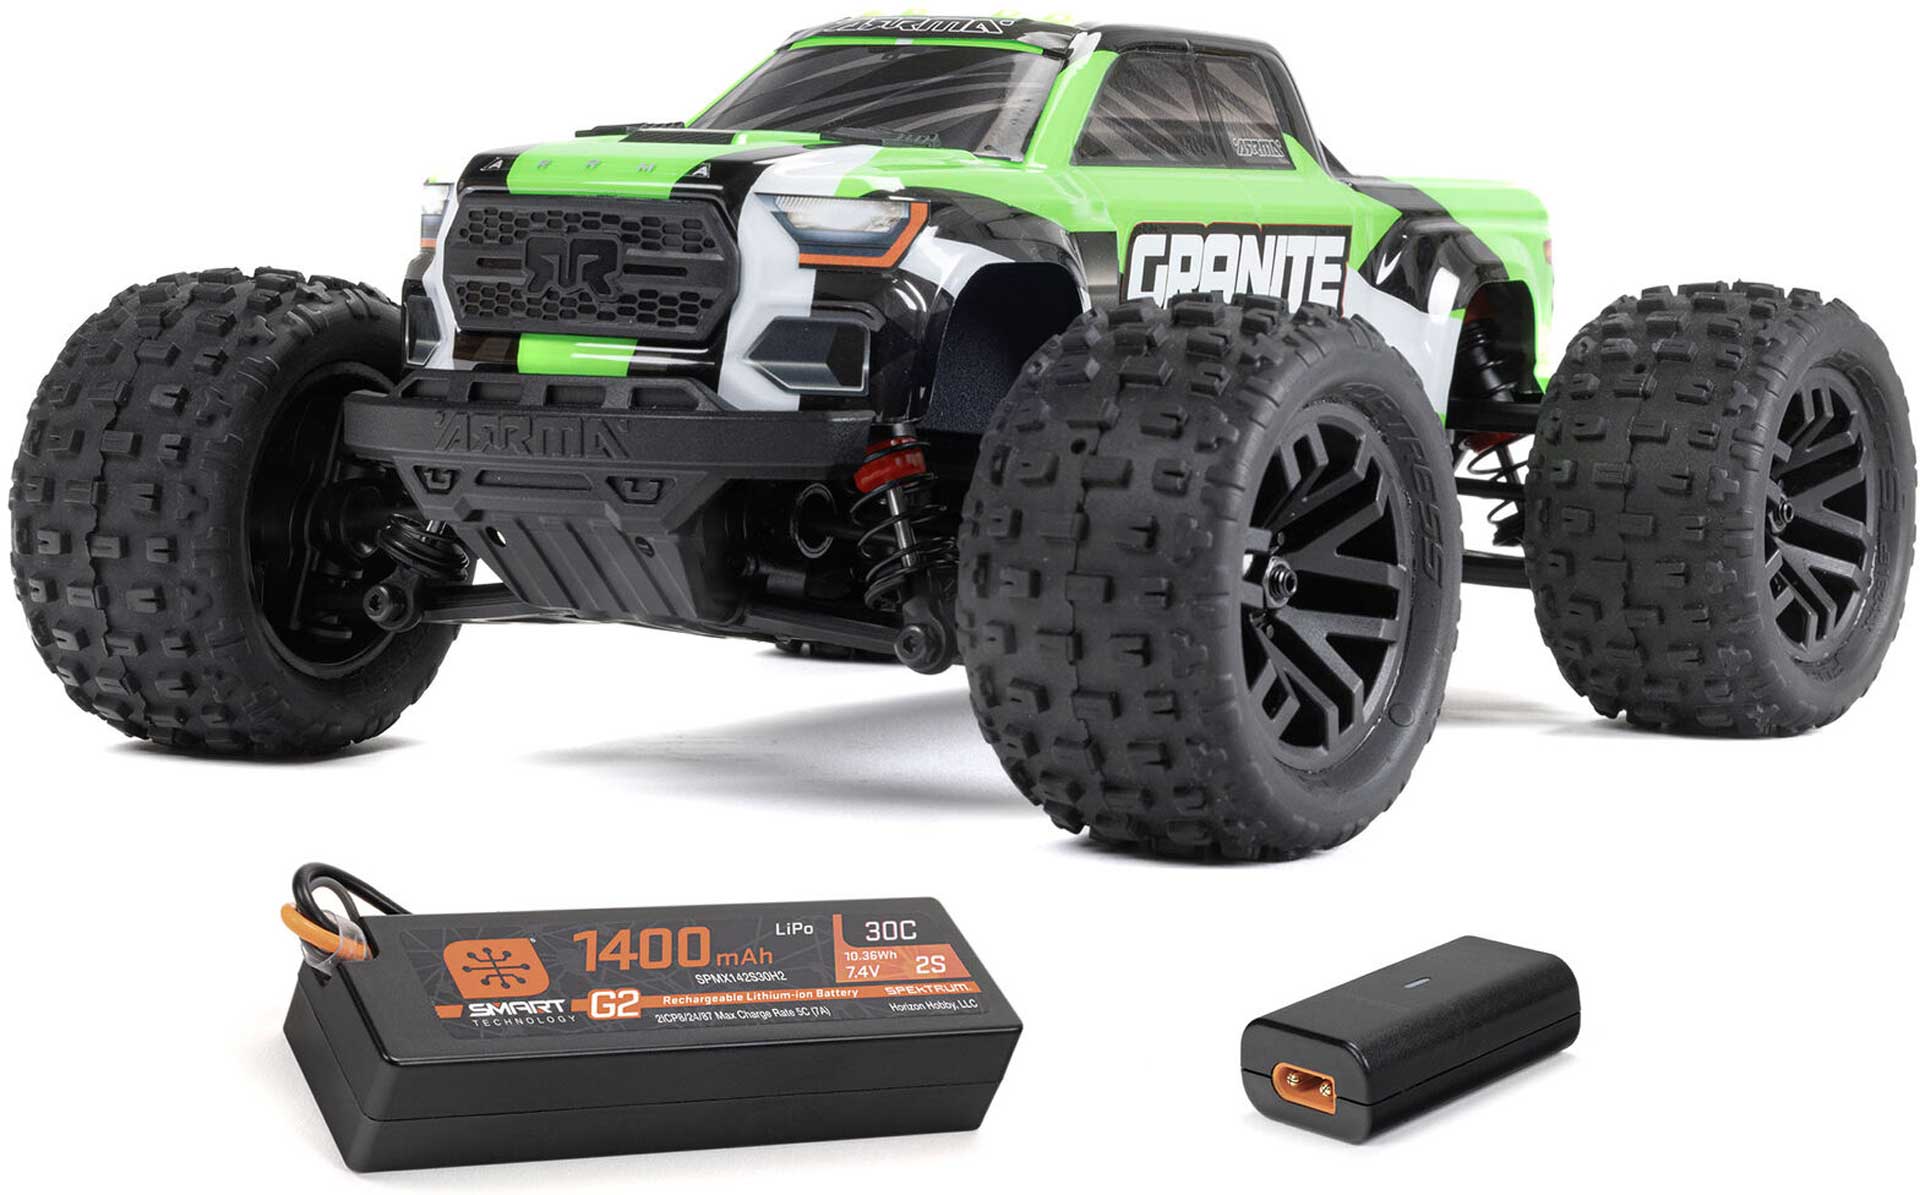 ARRMA GRANITE GROM 1/18 MEGA 380 Green Brushed 4x4 Monster Truck RTR incl. battery and charger